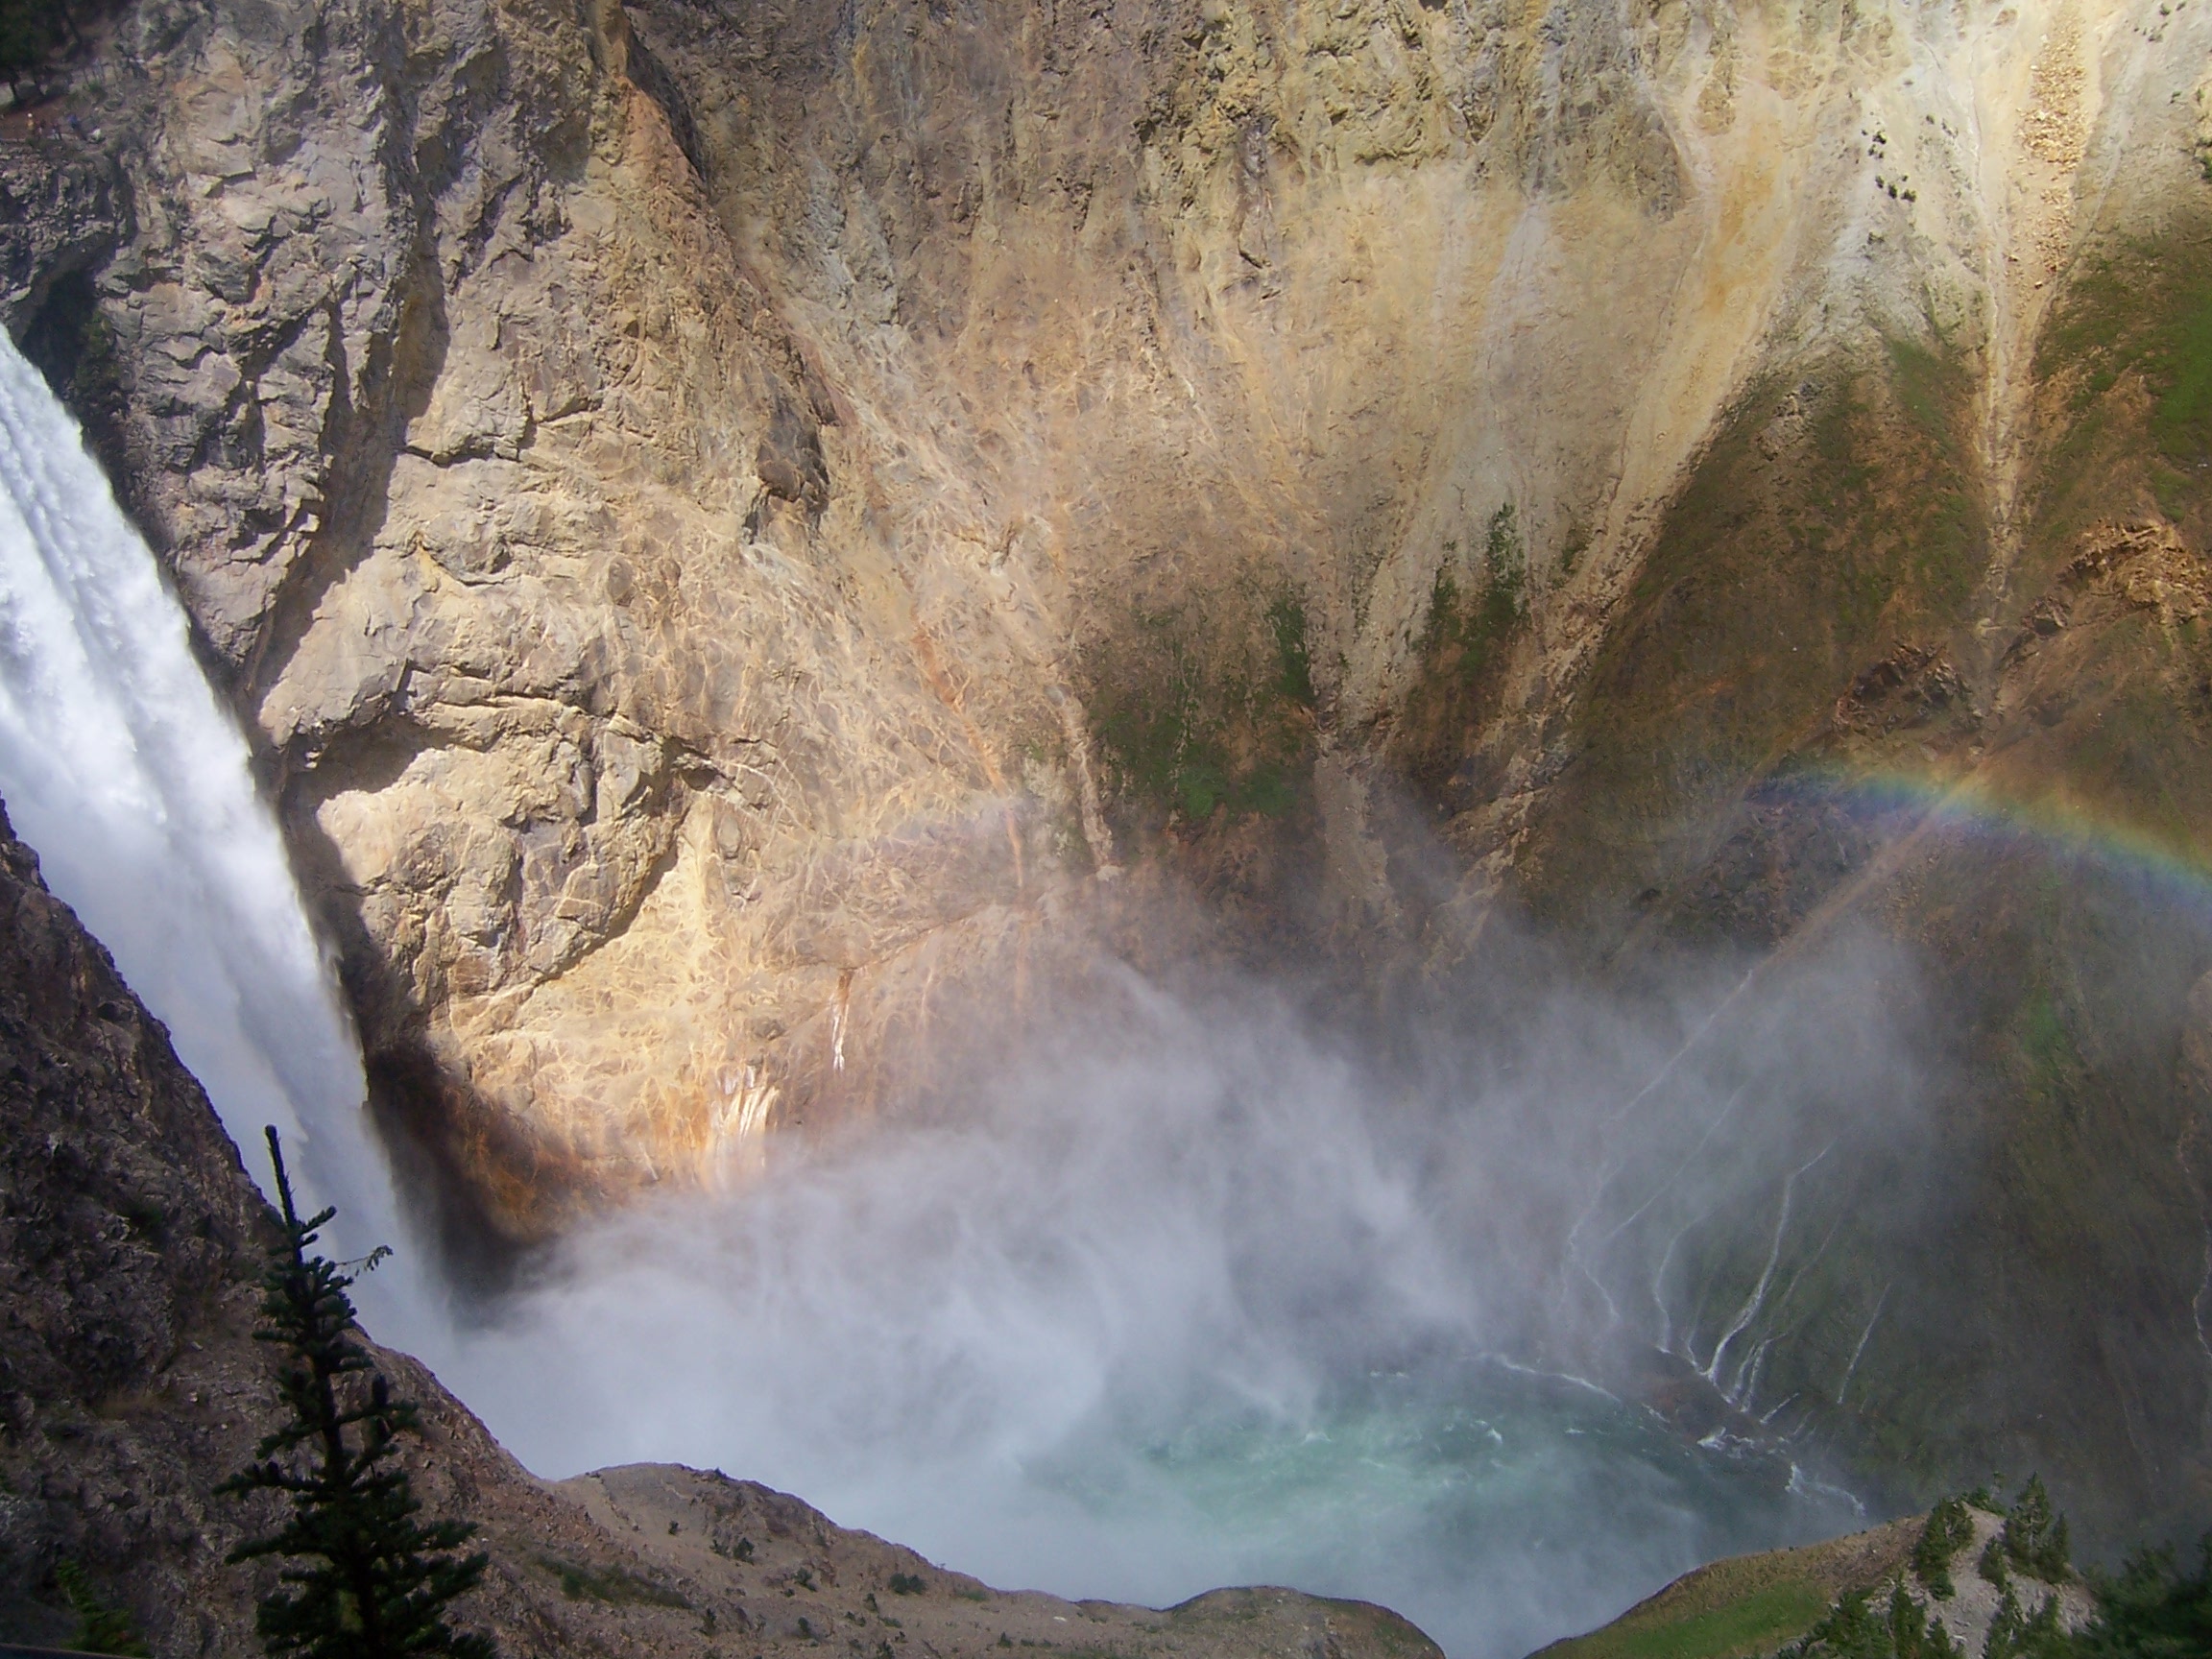 Lower falls with rainbow.